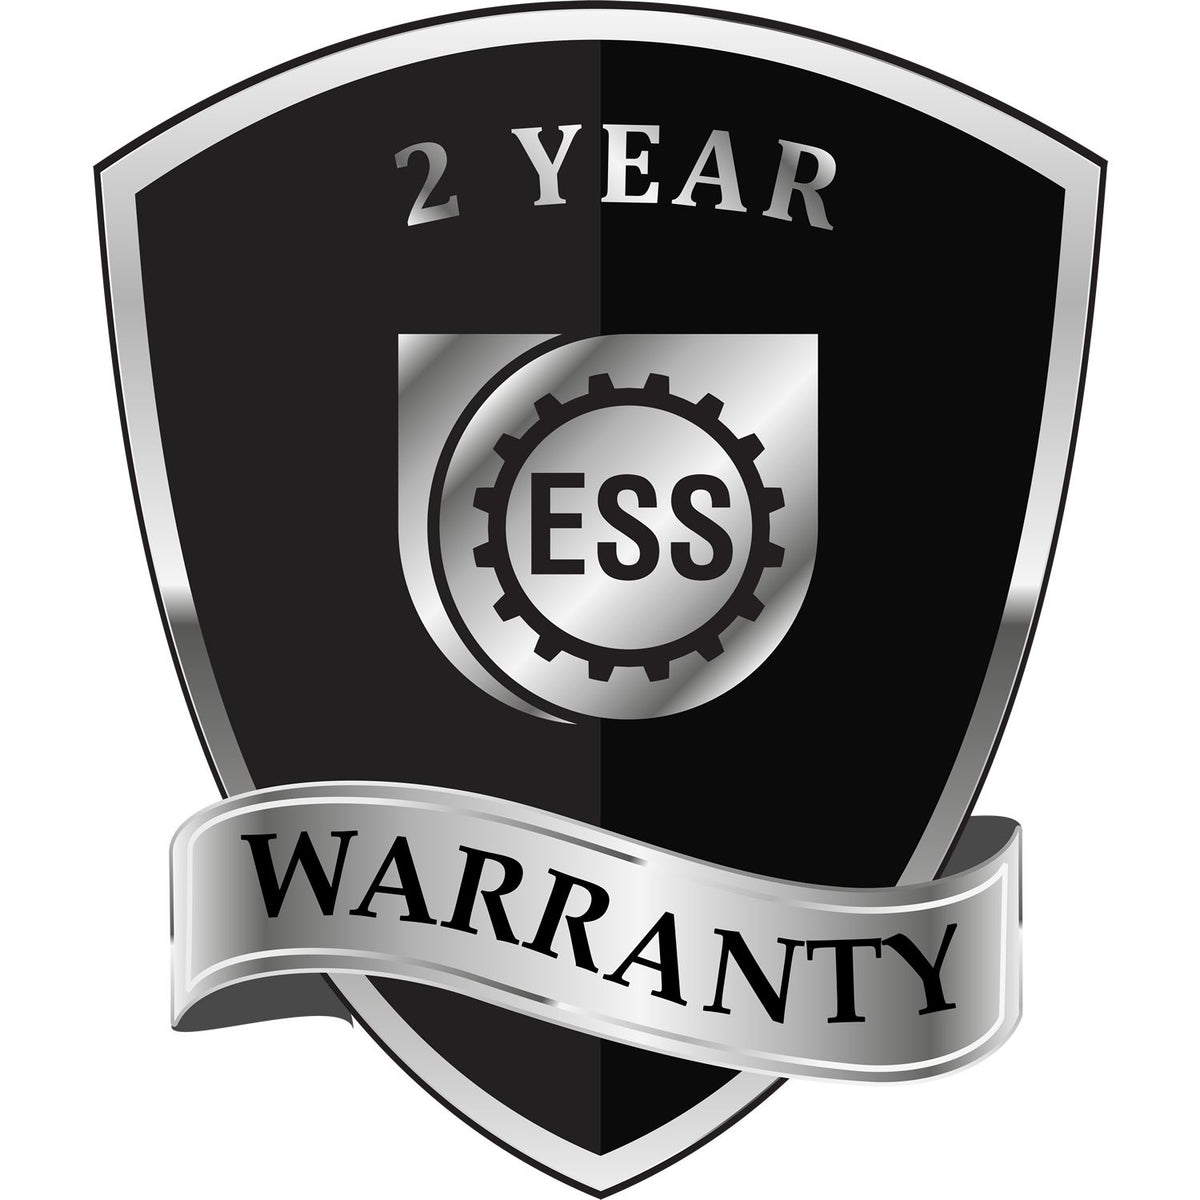 A badge or emblem showing a warranty icon for the Soft North Carolina Professional Engineer Seal